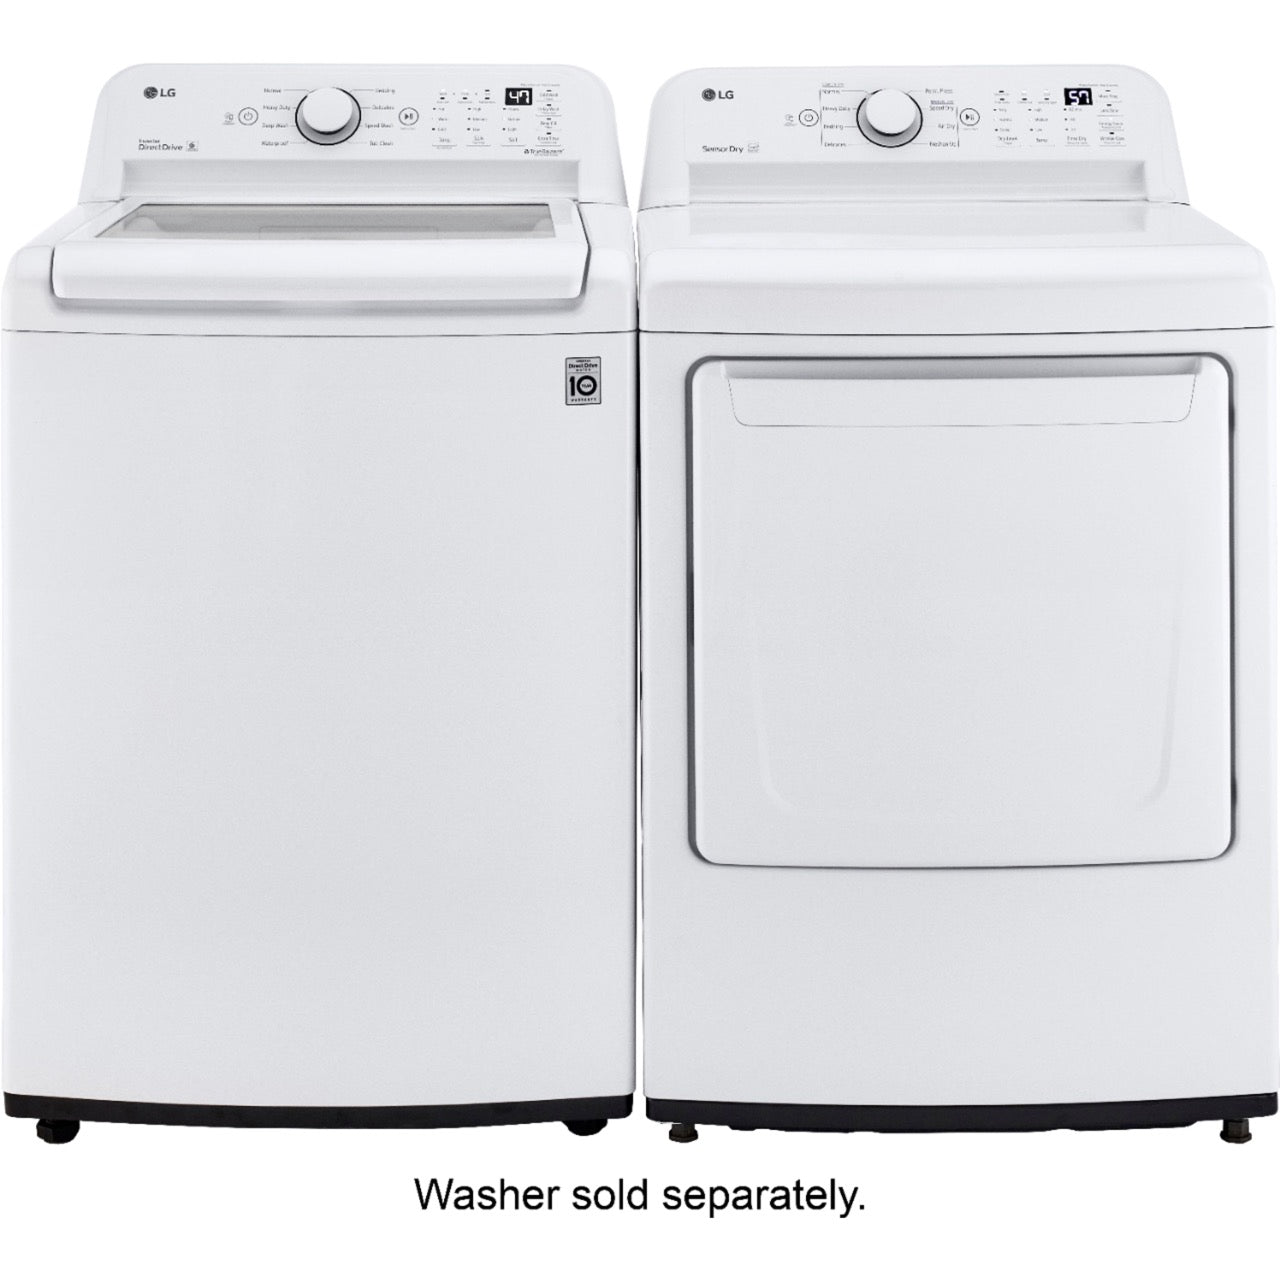 LG 7.3-Cu. Ft. Ultra Large Capacity Electric Dryer with Sensor Dry Technology in White (DLE7000W)